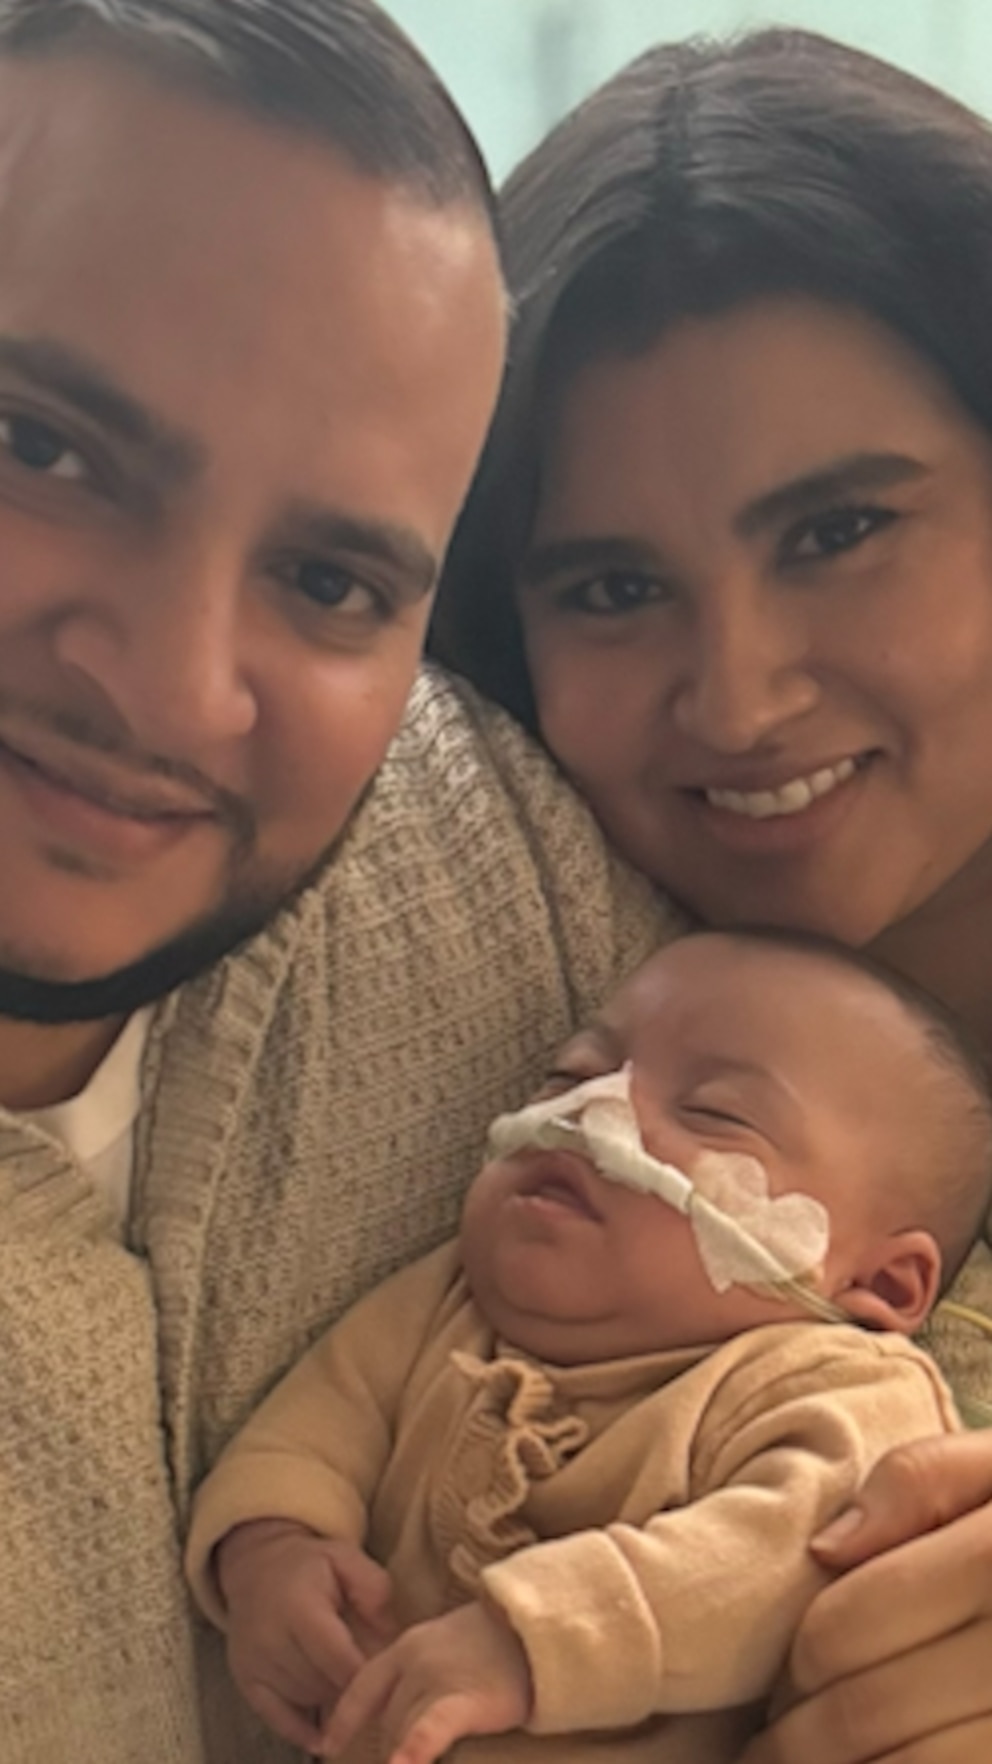 WATCH: 'Miracle' baby born at 26 weeks heads home from the NICU